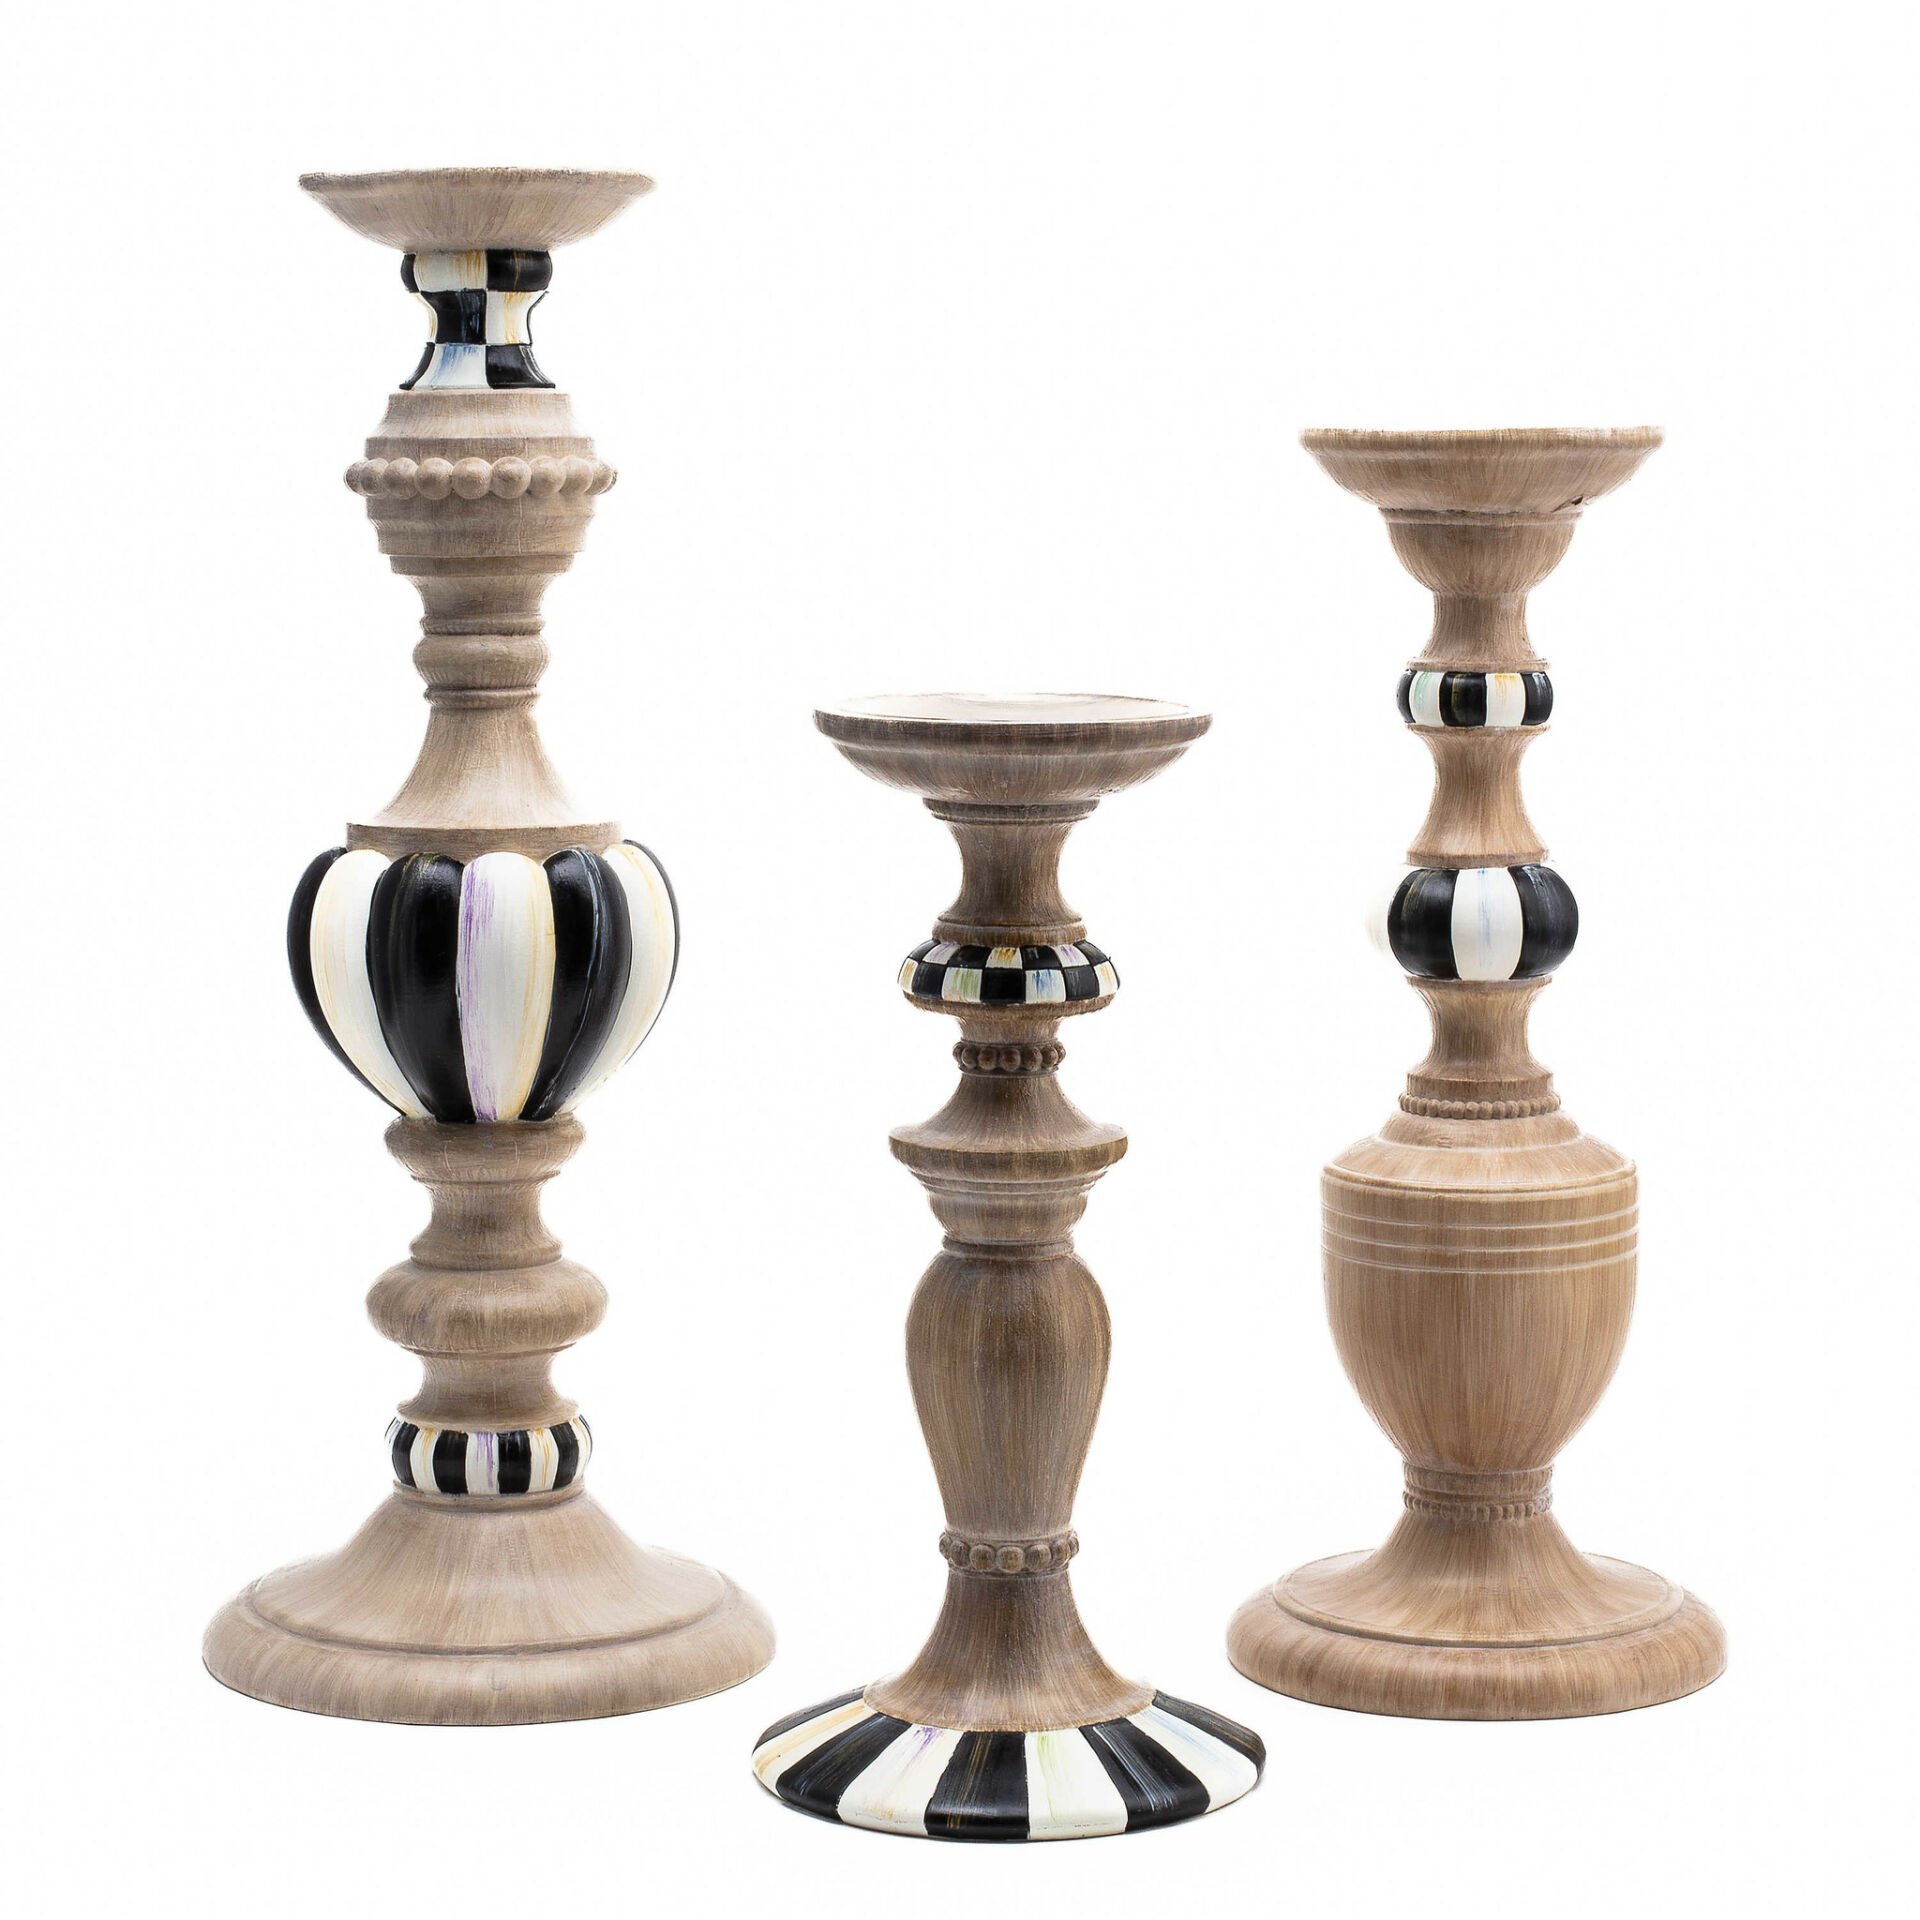 Courtly Pillar Candle Holders - Set of 3